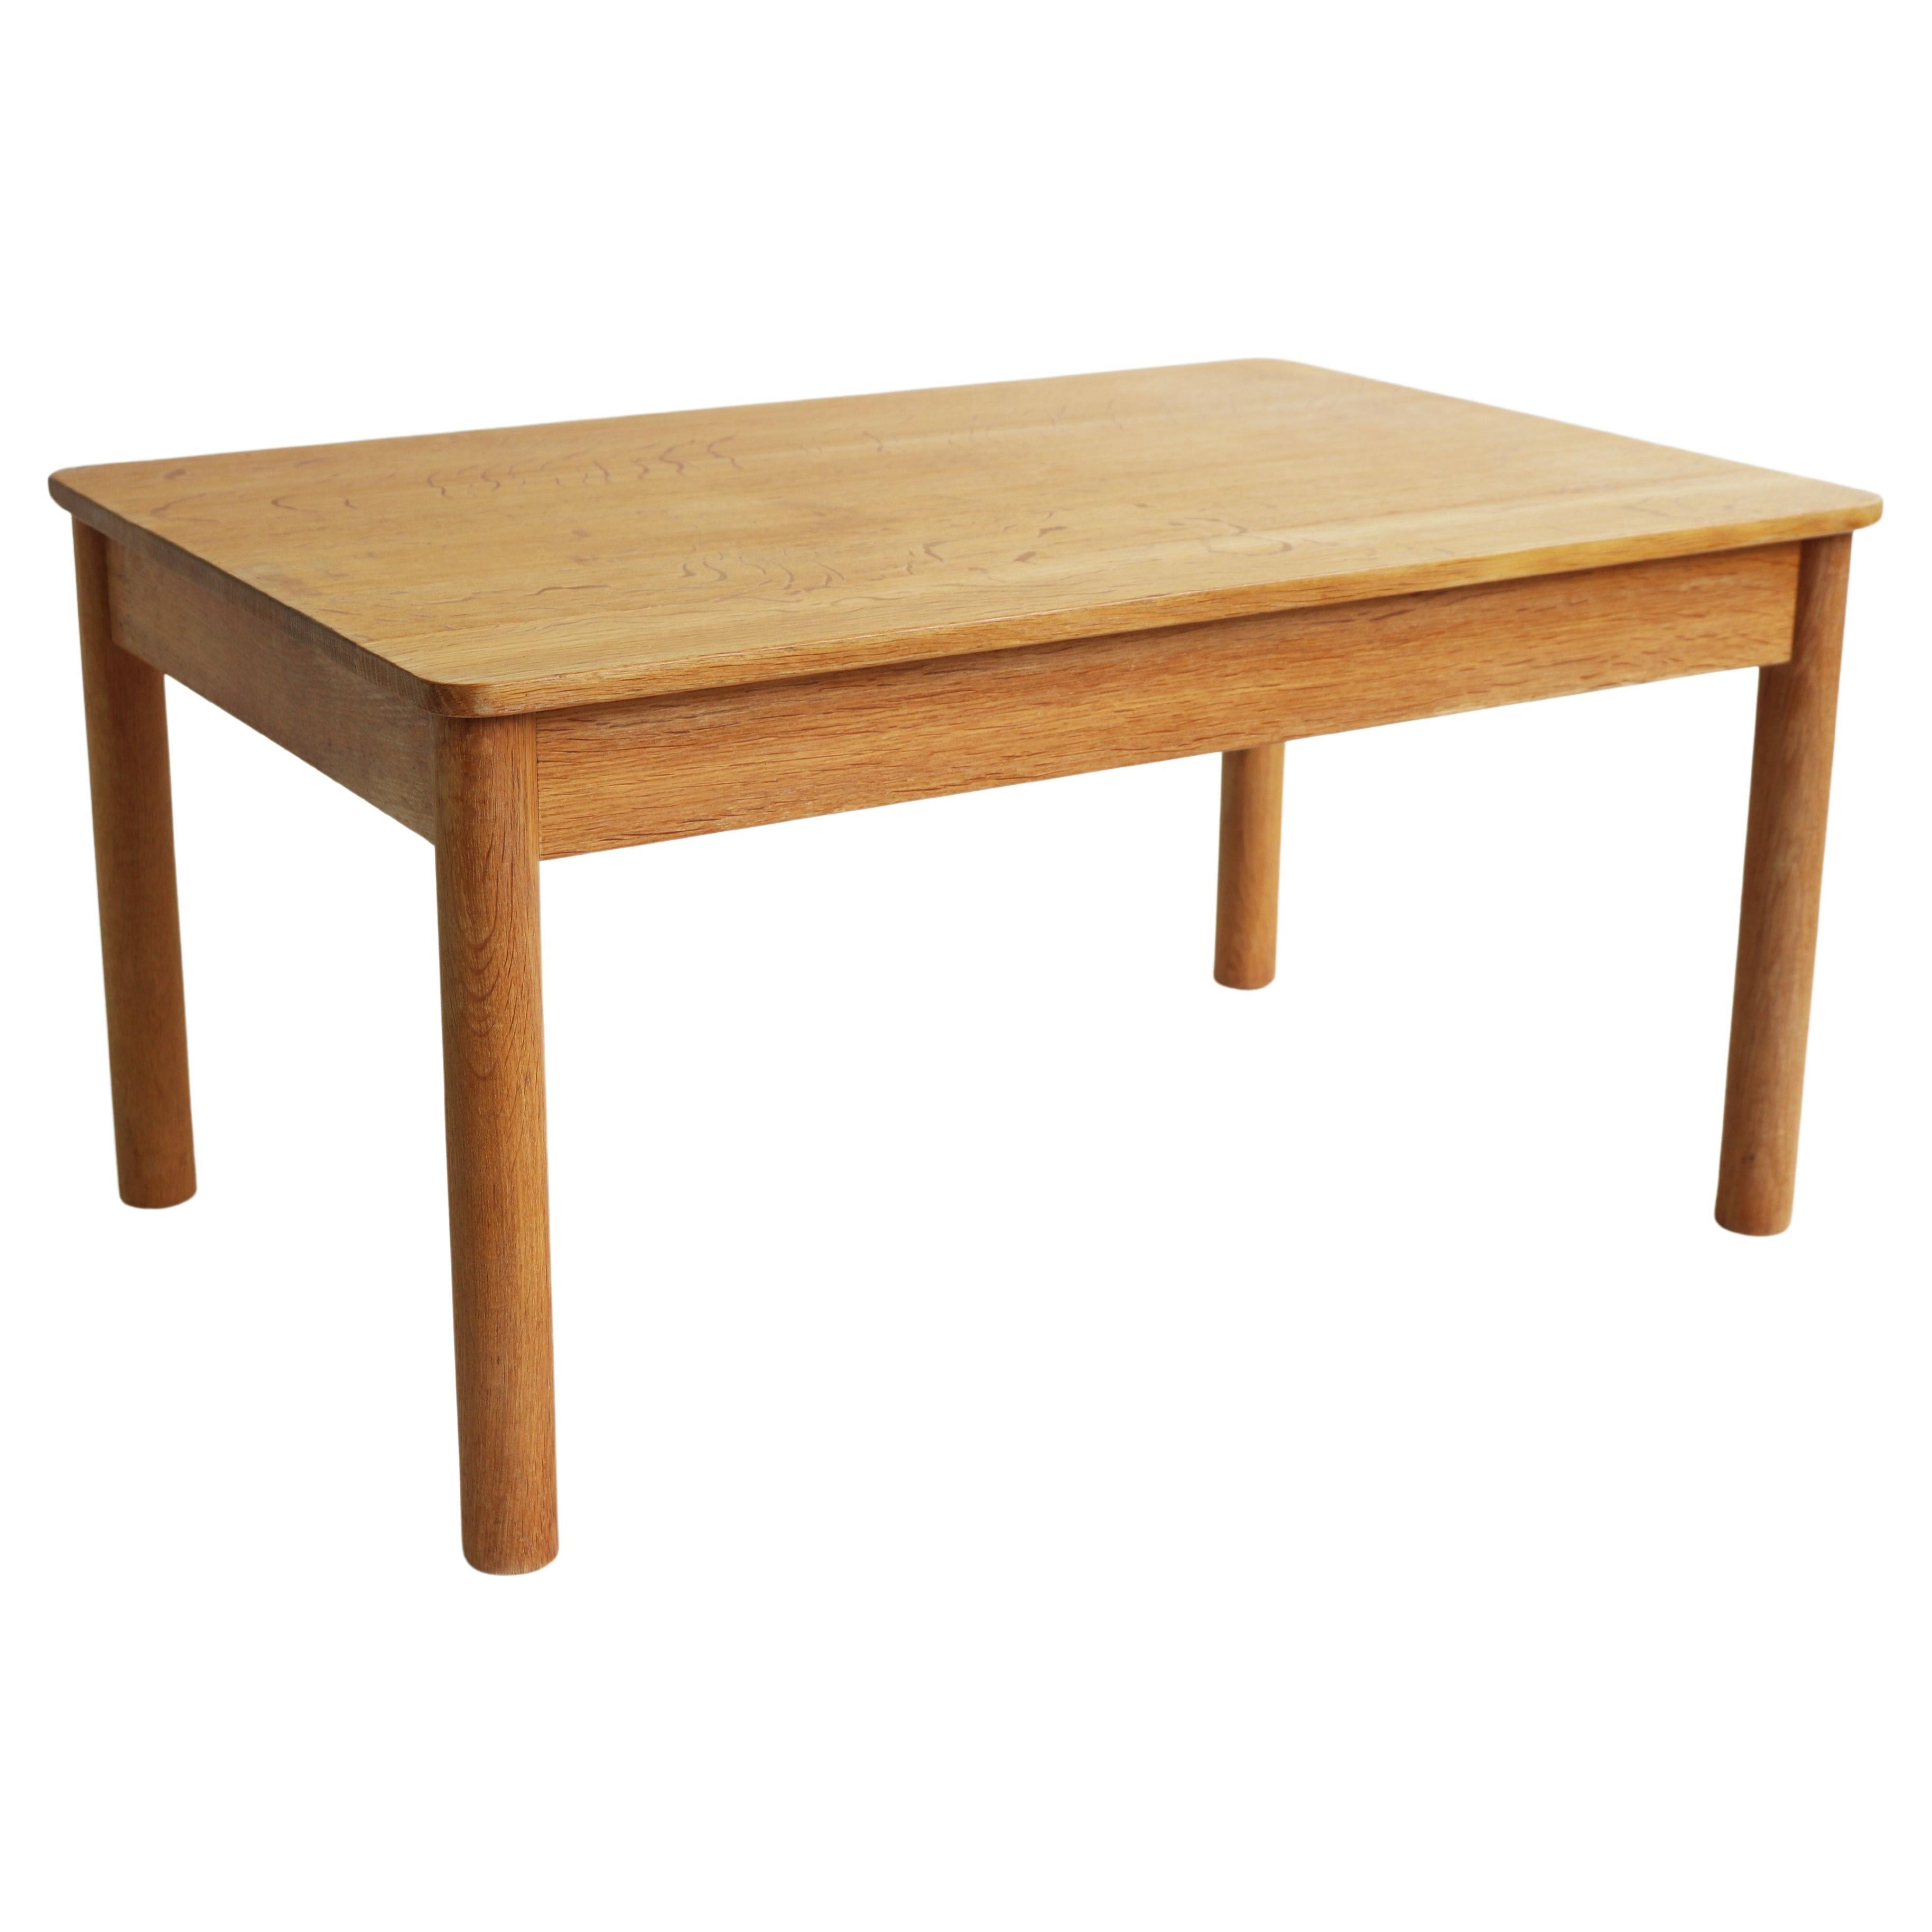 Solid oak coffee table Model: 5350 by Borge Mogensen 1950 Shaker syle side table For Sale